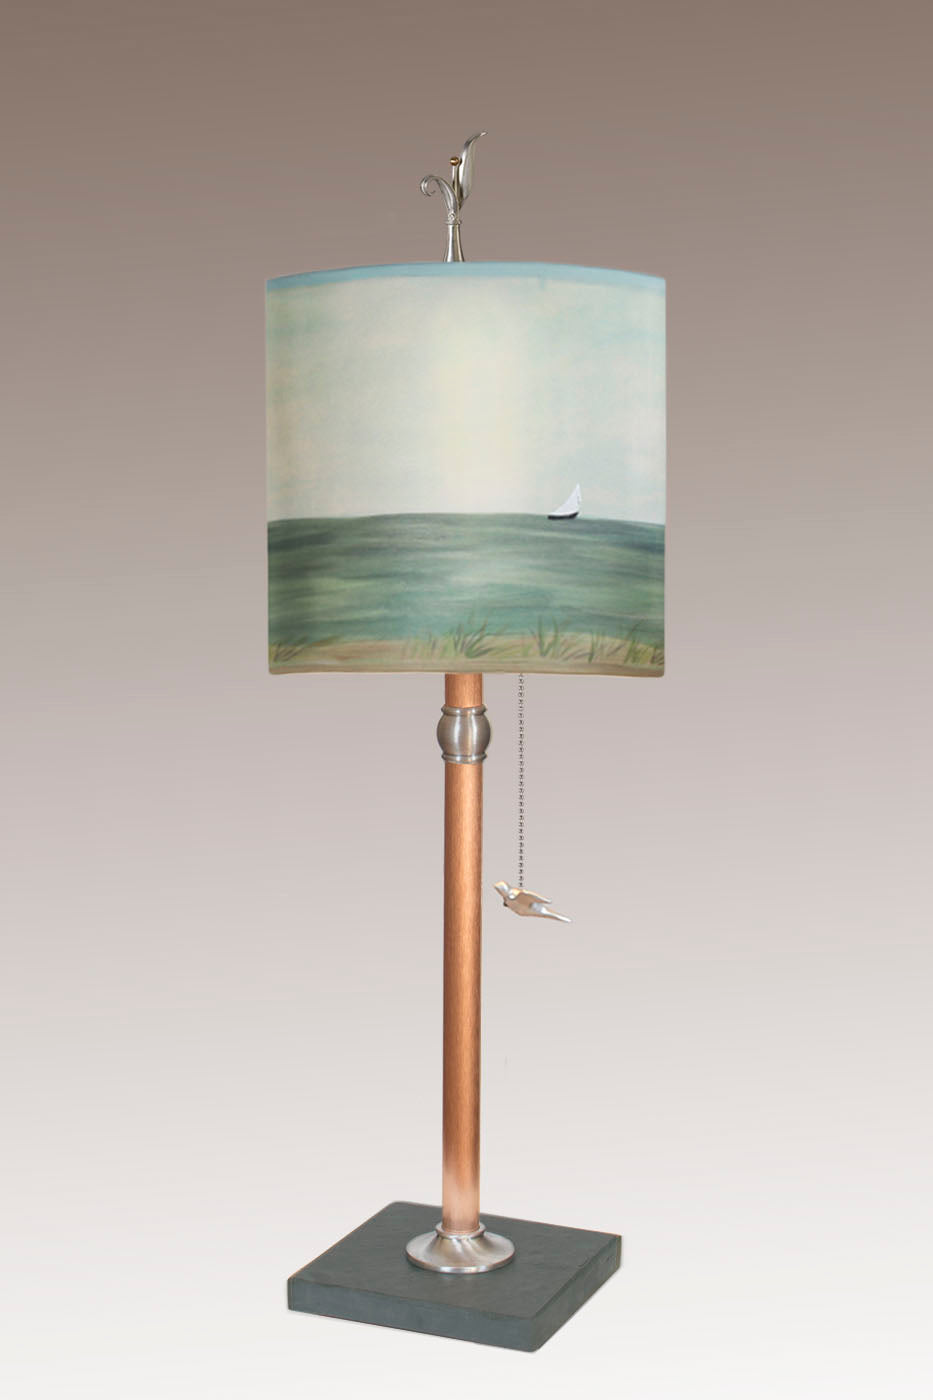 Janna Ugone & Co Table Lamps Copper Table Lamp with Medium Drum Shade in Shore